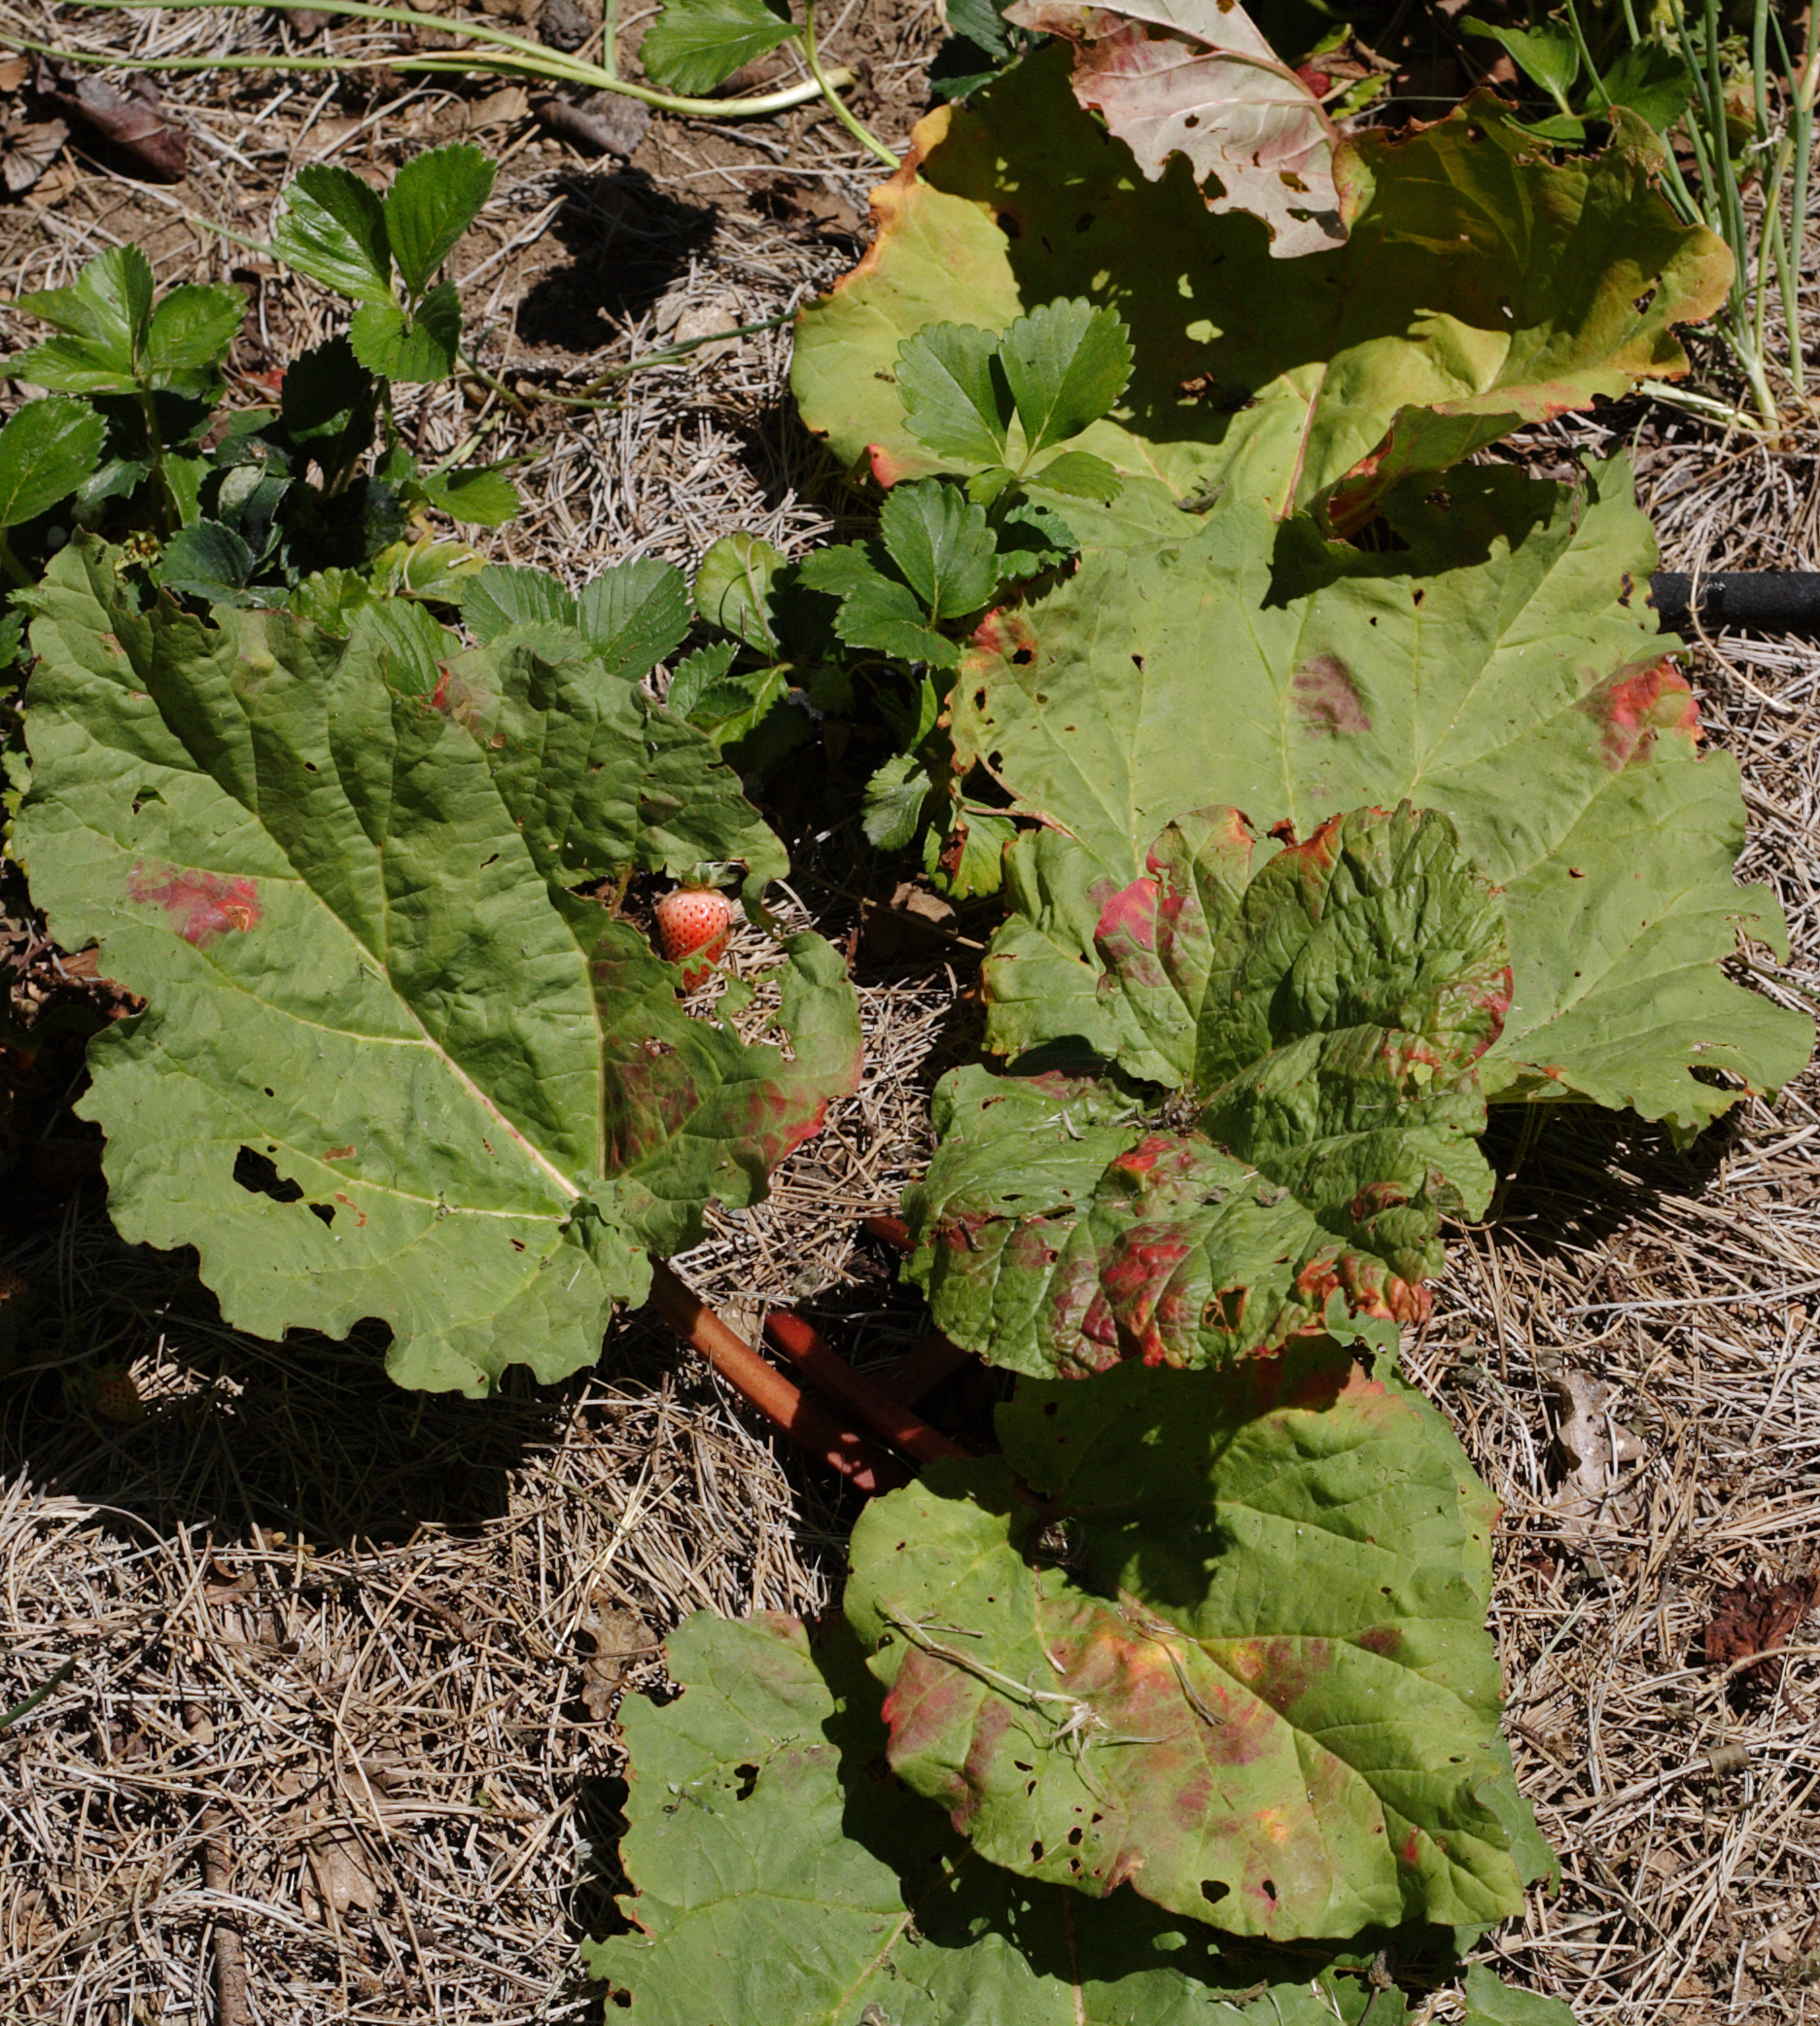 My rhubarb leaves are turning red - Ask an Expert